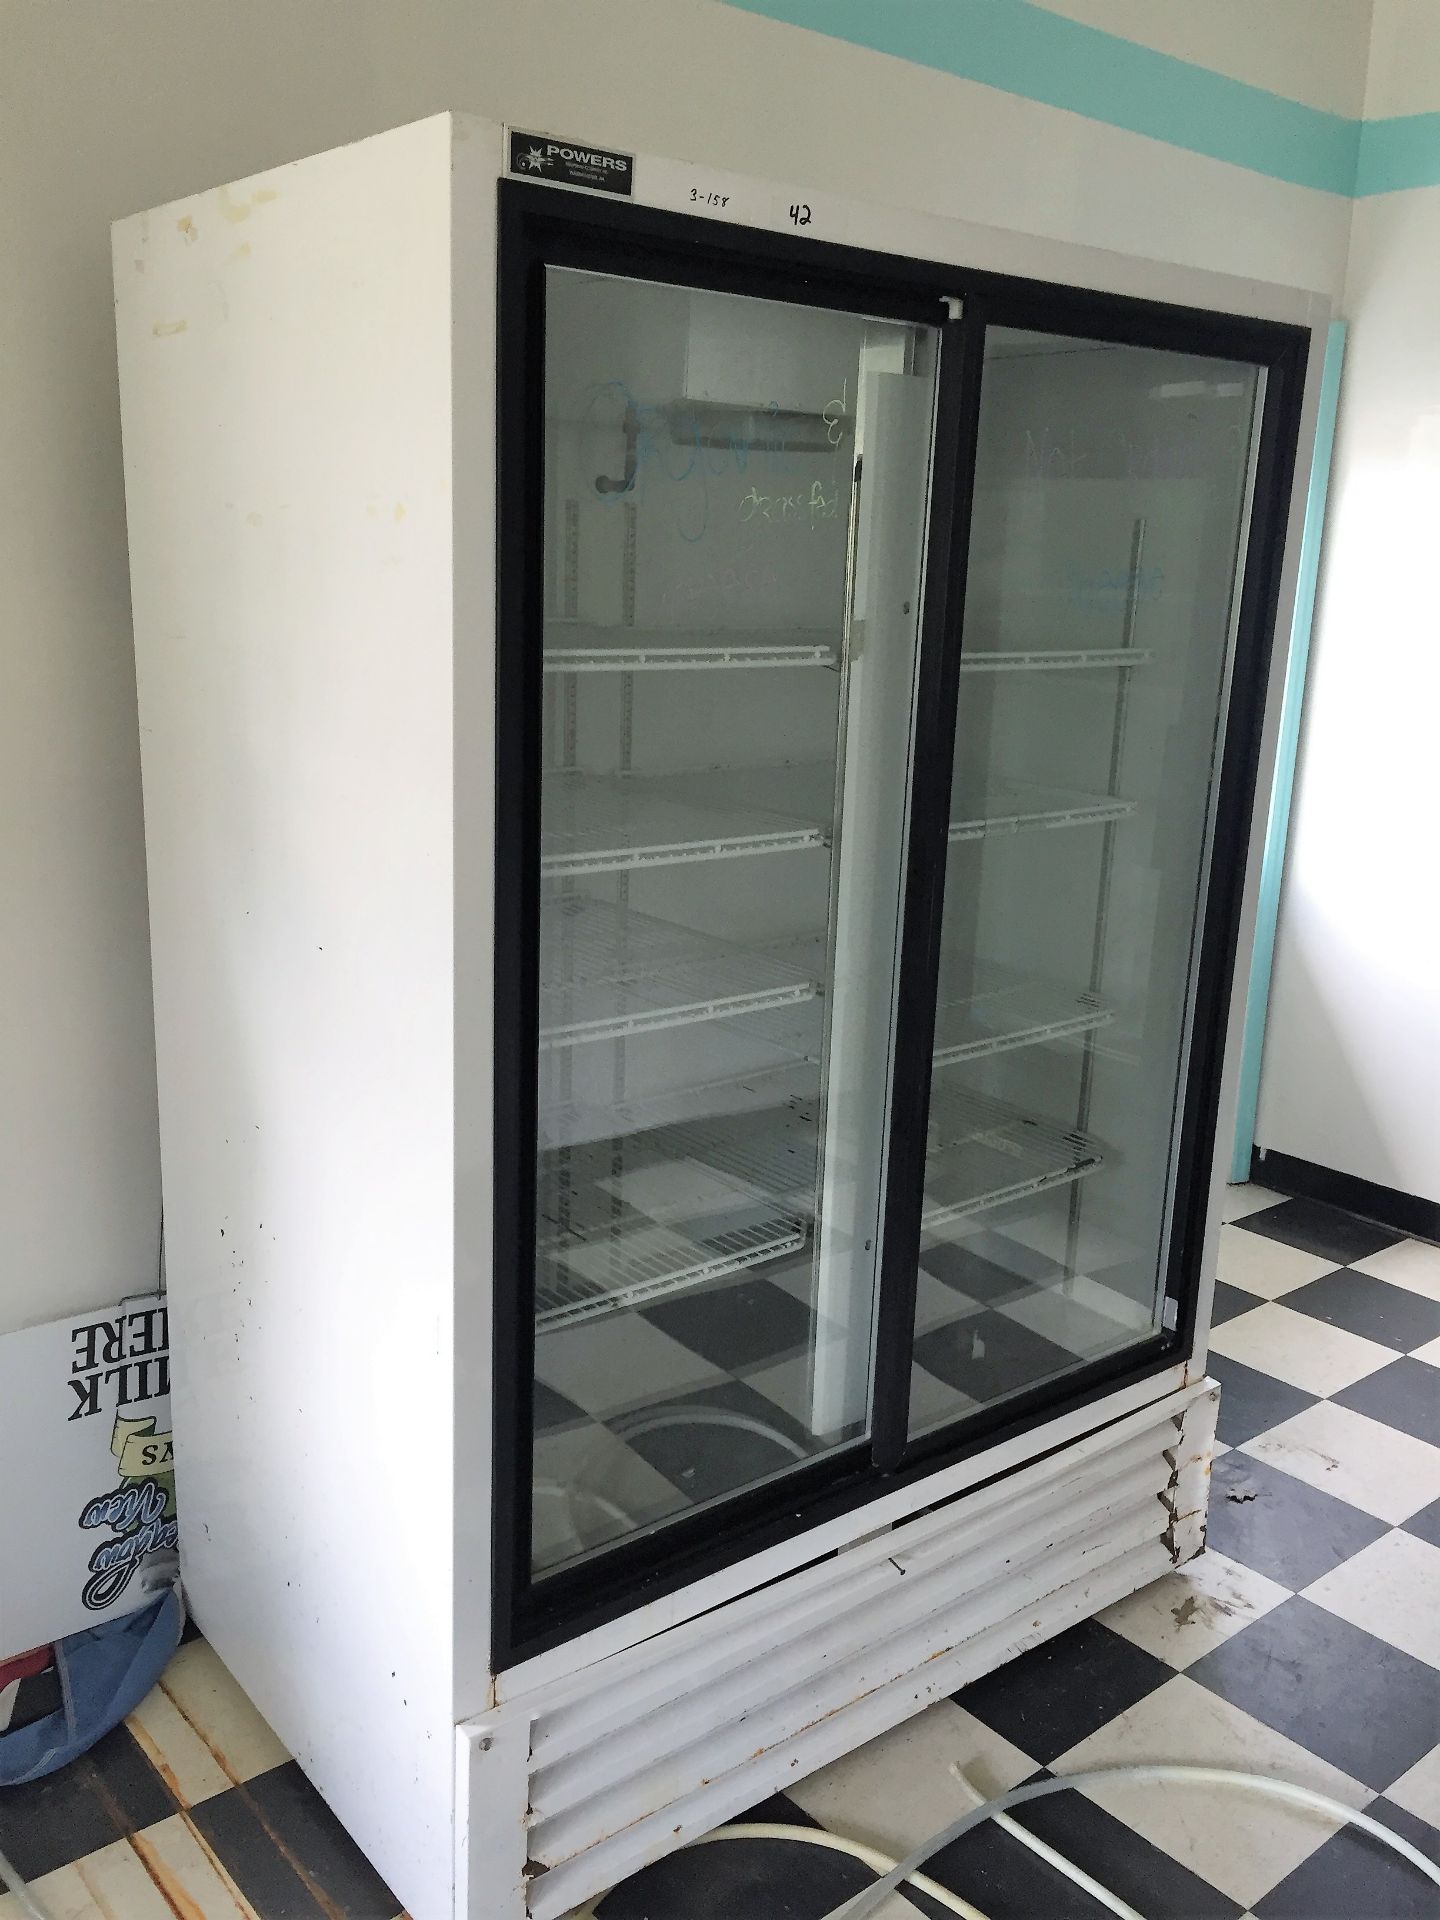 Powers 2 door refrigerated display case model bs52gdf.Was working great when store closed in 1st - Image 3 of 3